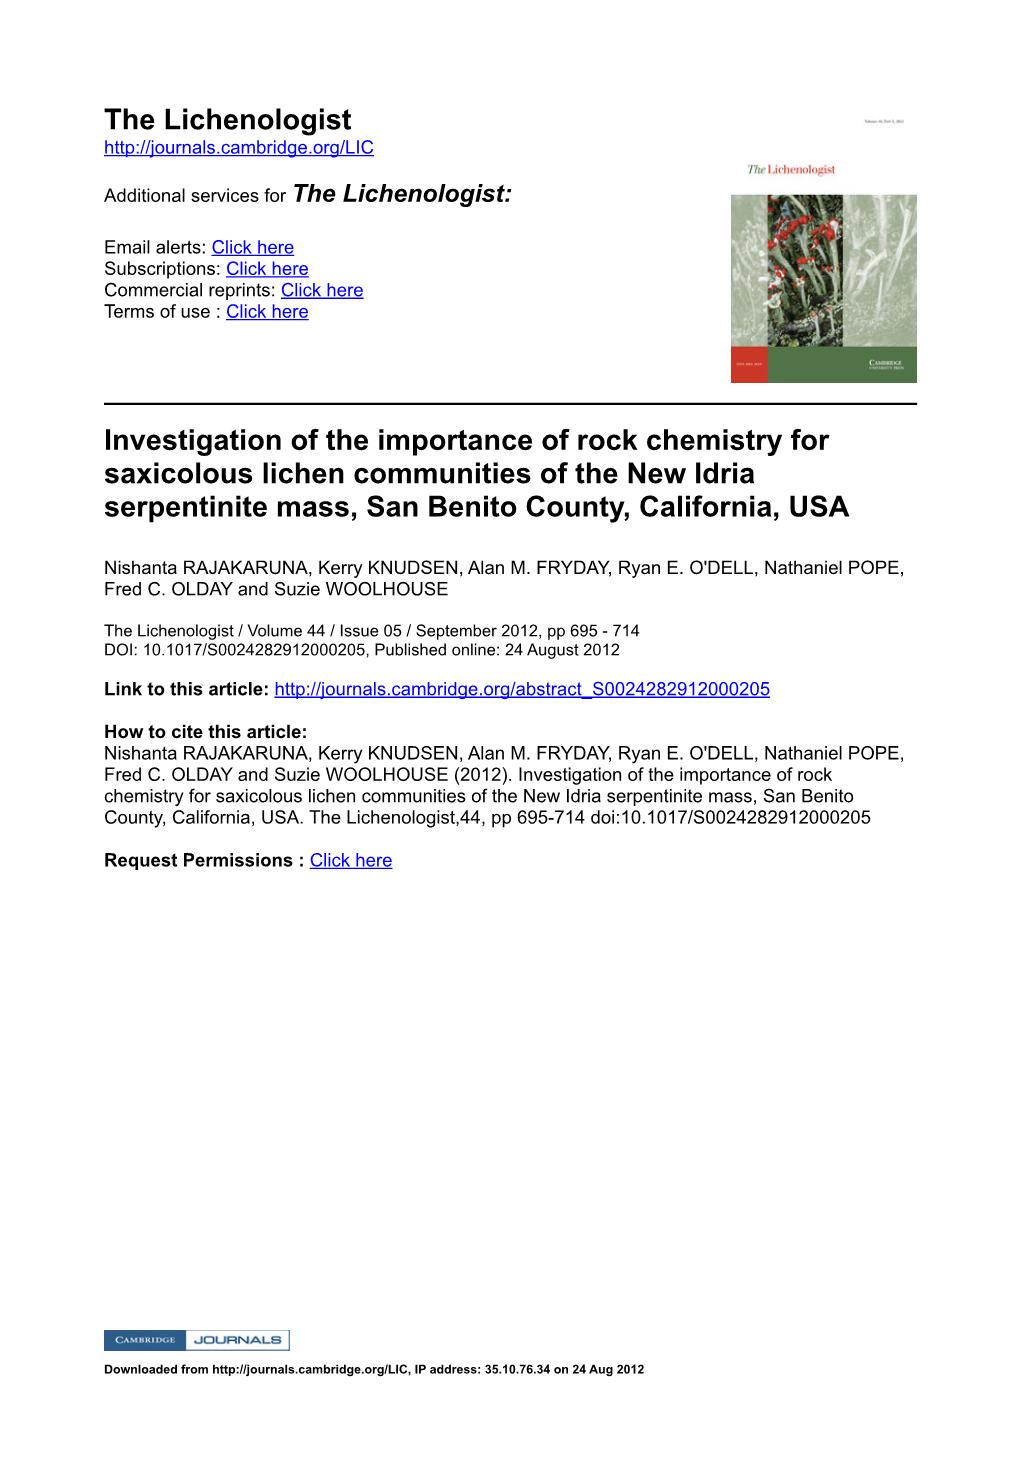 The Lichenologist Investigation of the Importance of Rock Chemistry For